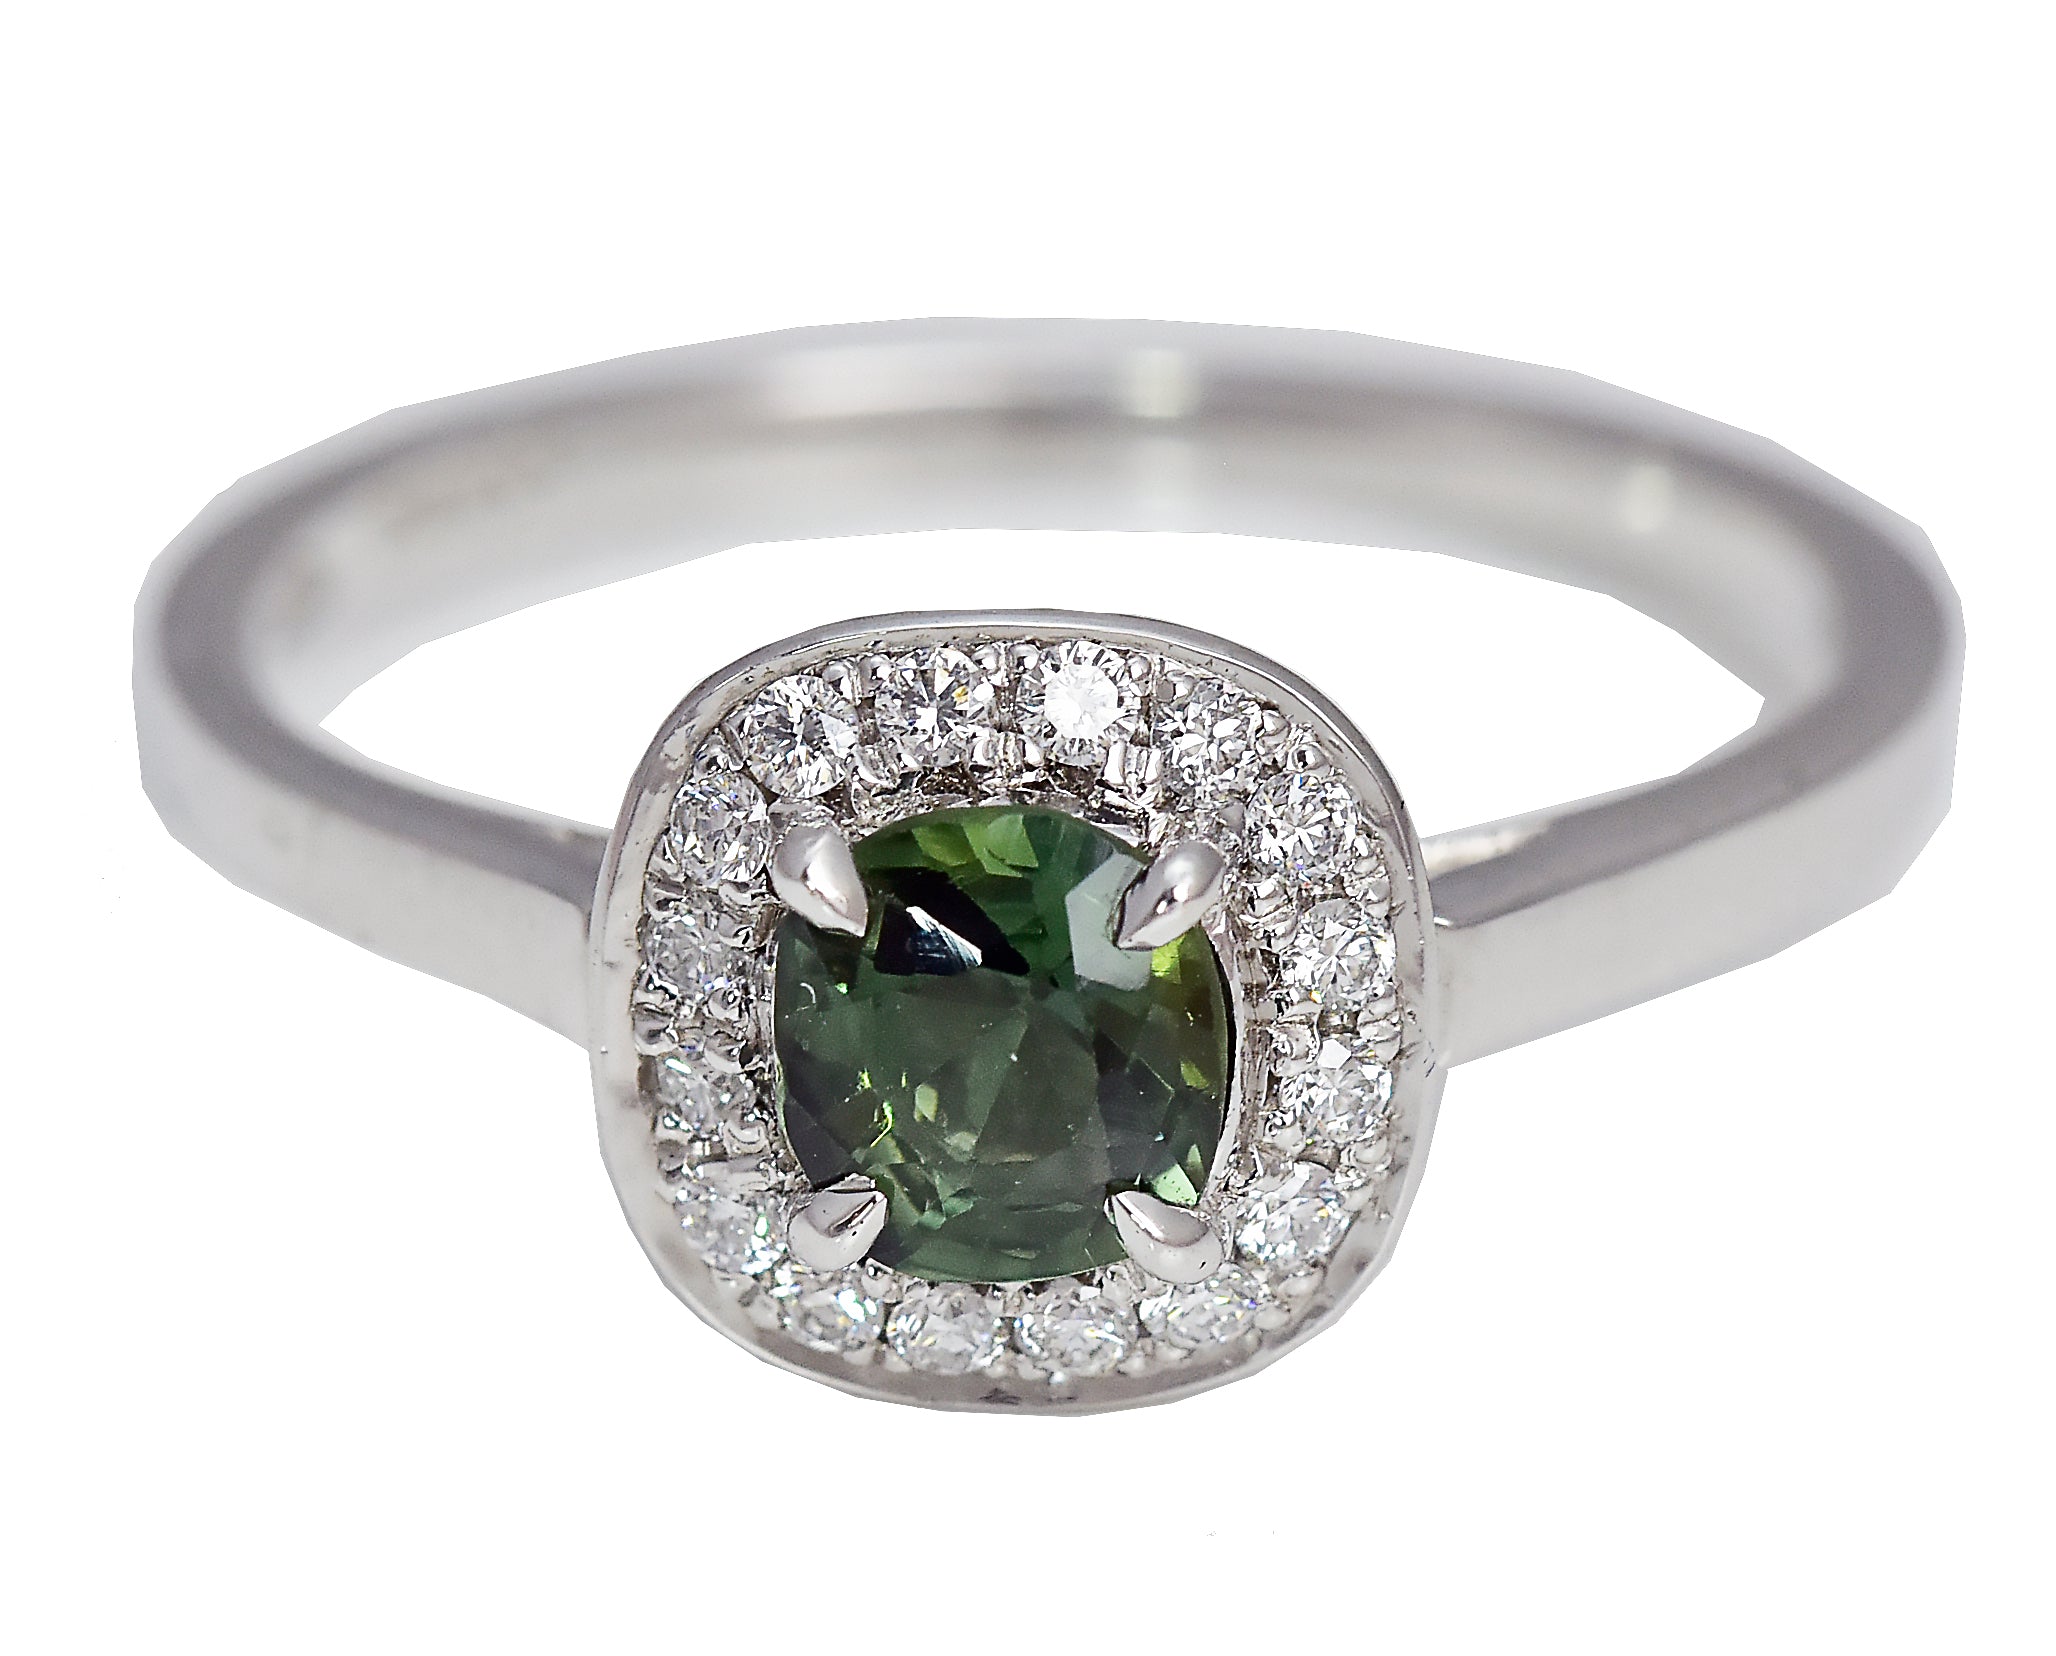 Green Sapphire Ring with White Diamond Halo